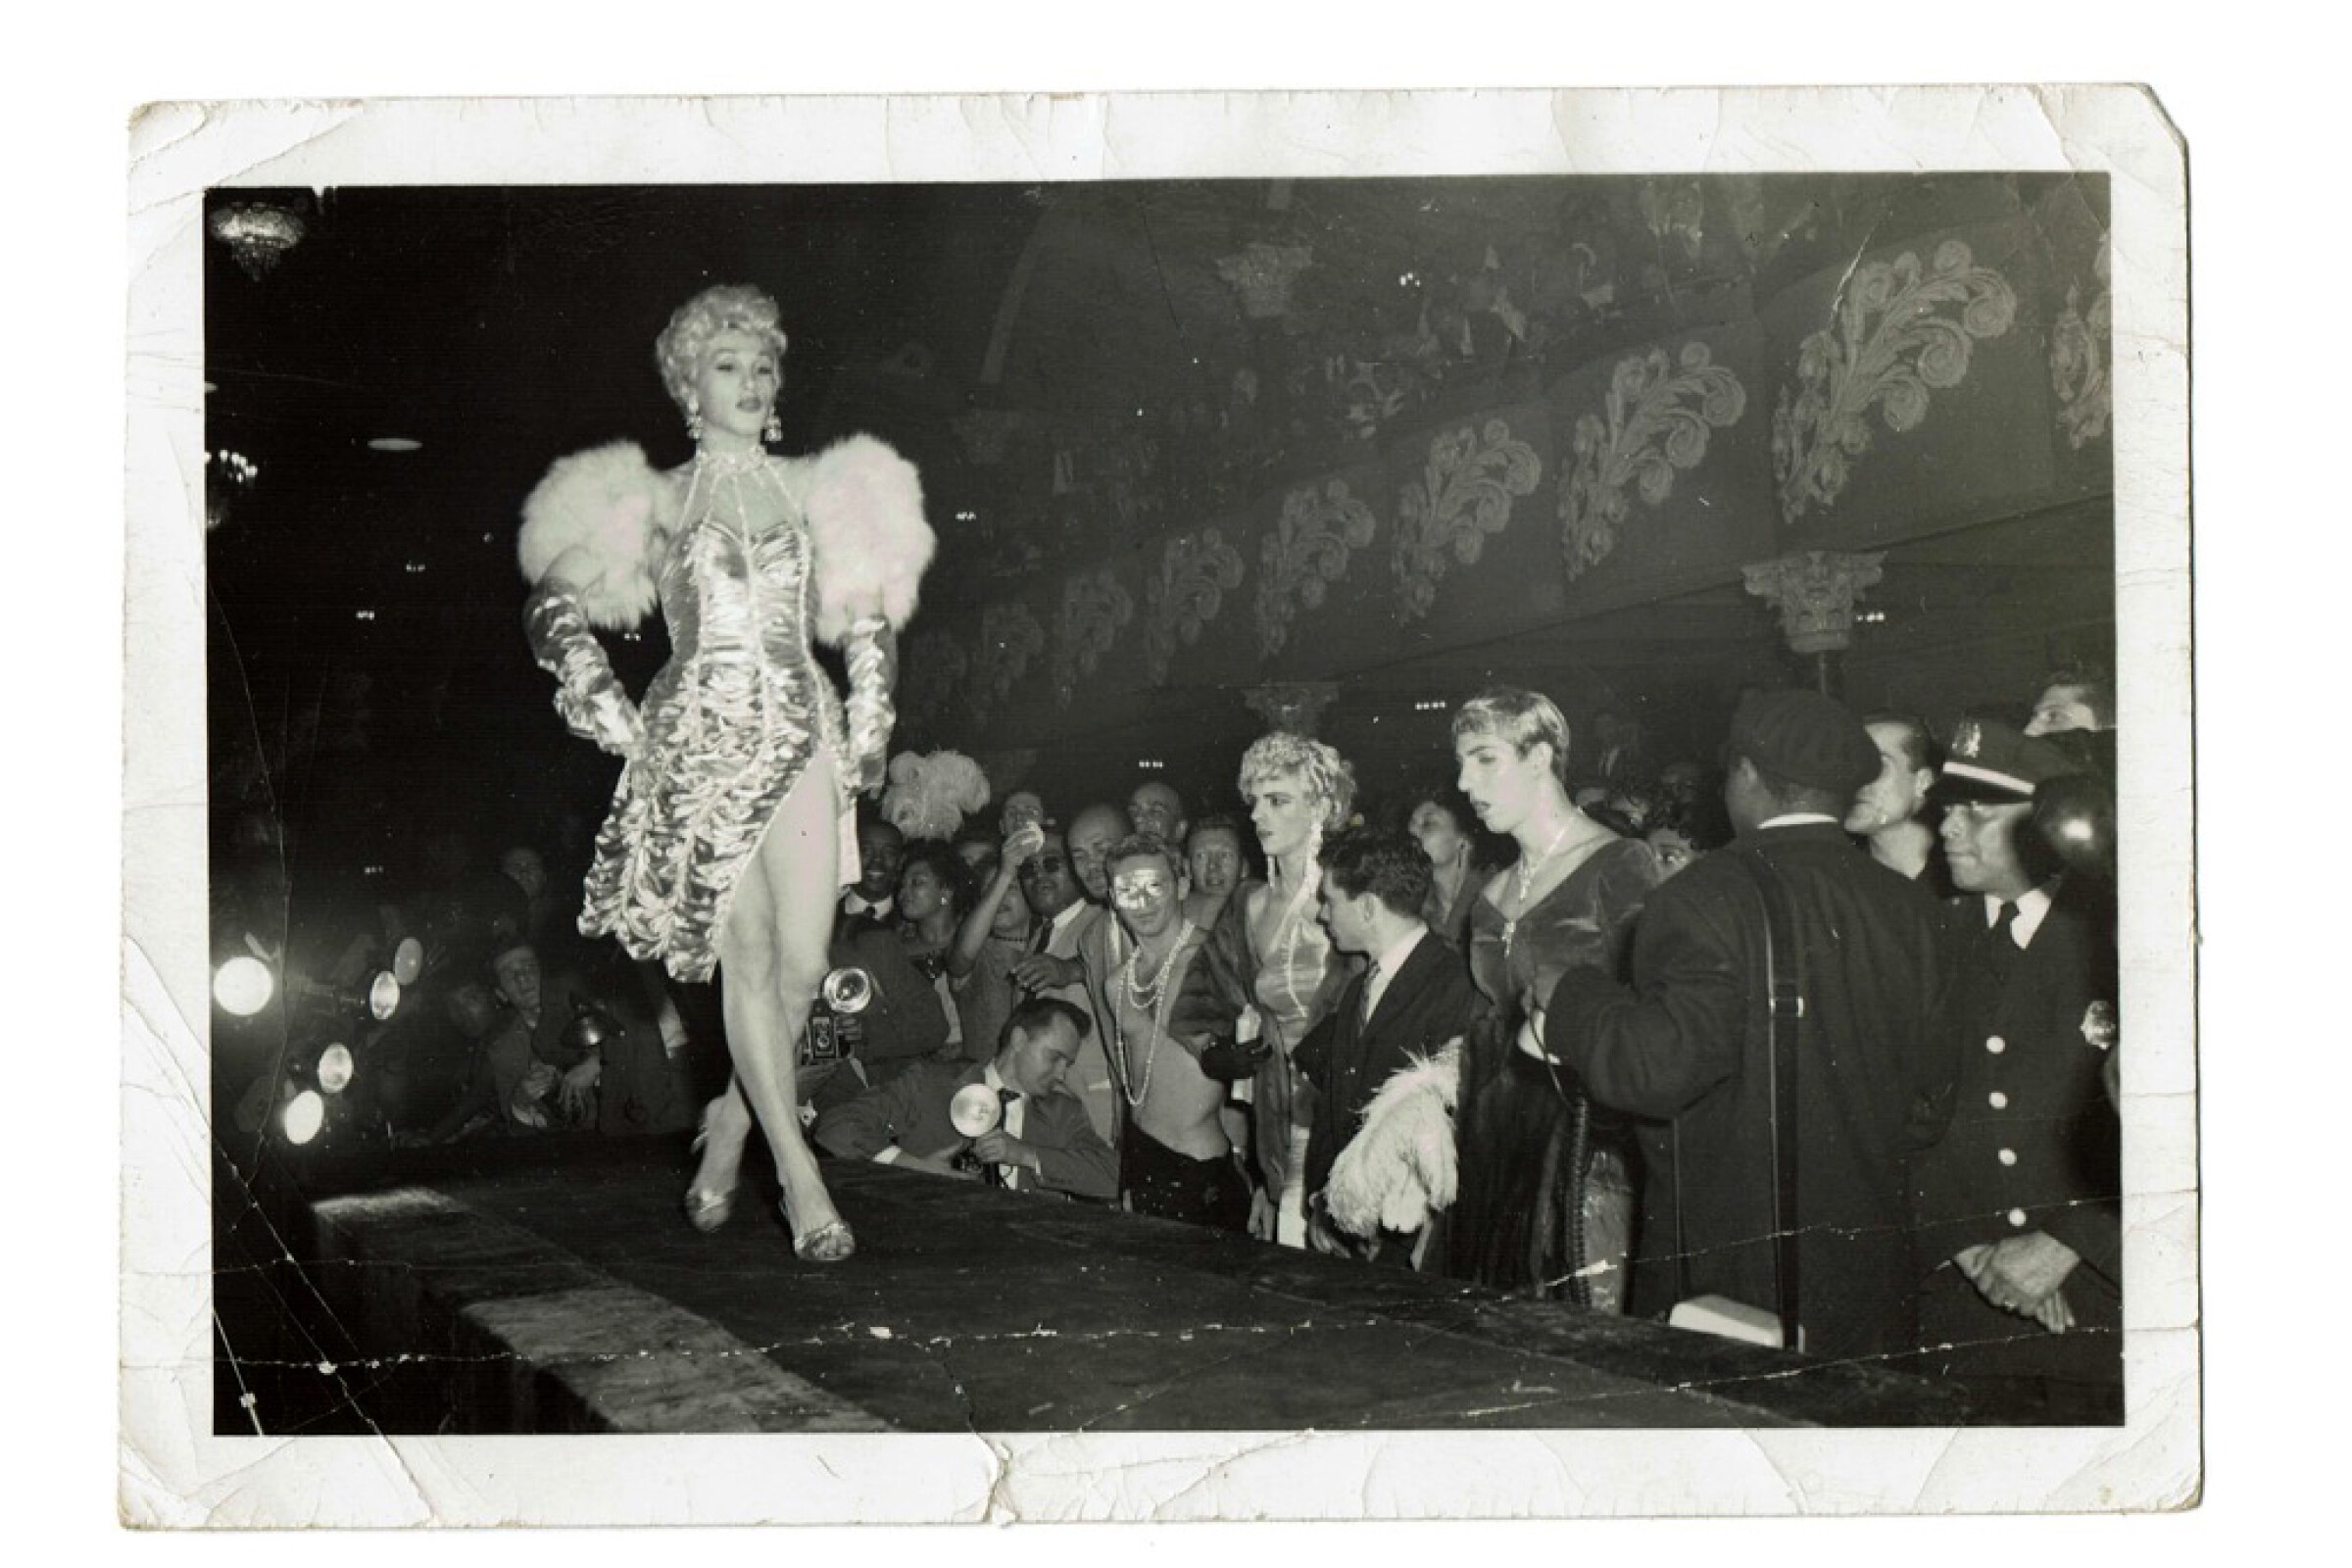 Michael Alogna at a drag ball circa 1955 at Rockland Palace, from the documentary "P.S. Burn This Letter Please"